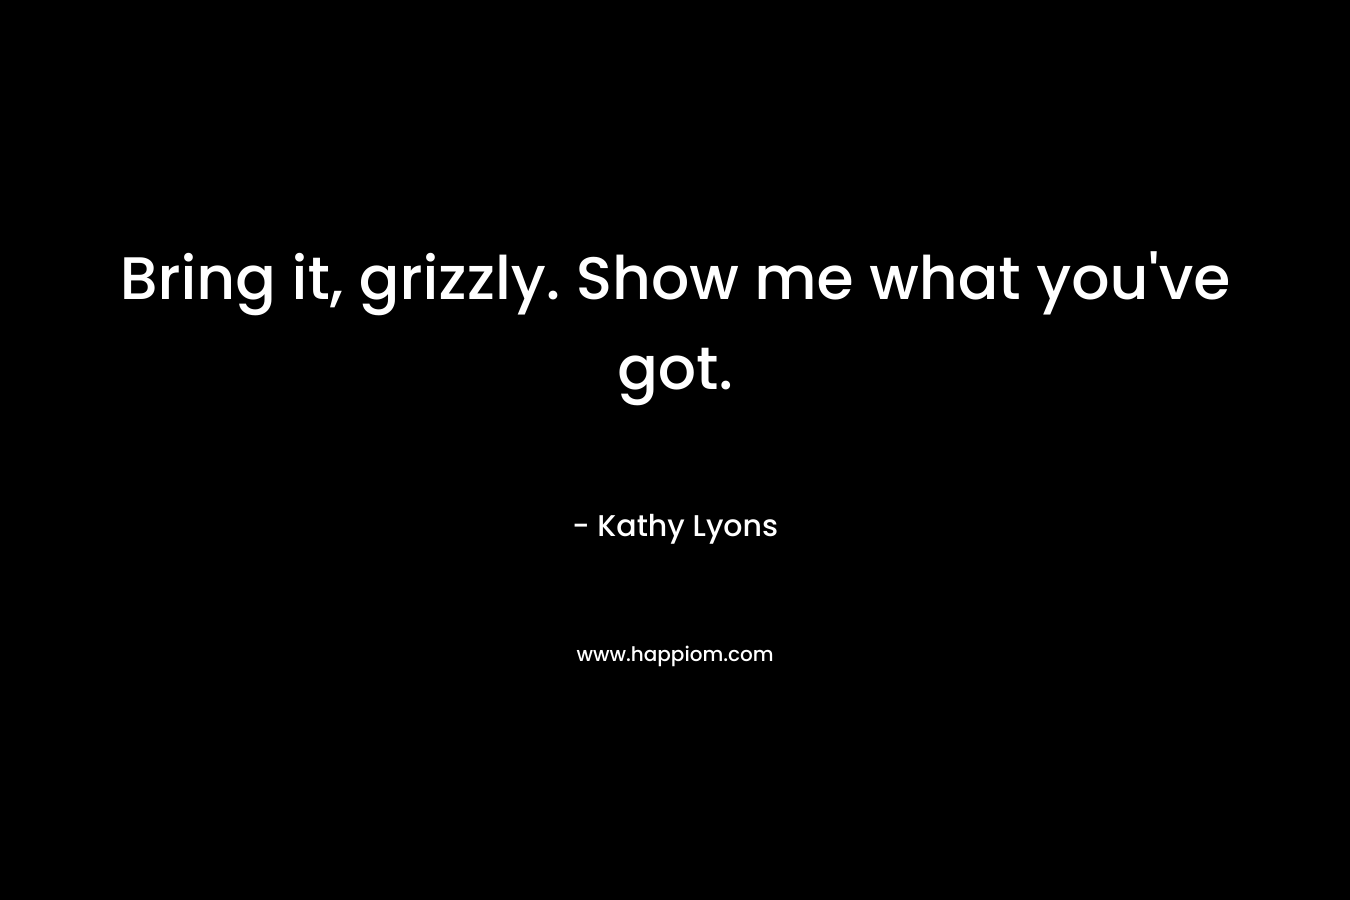 Bring it, grizzly. Show me what you've got.